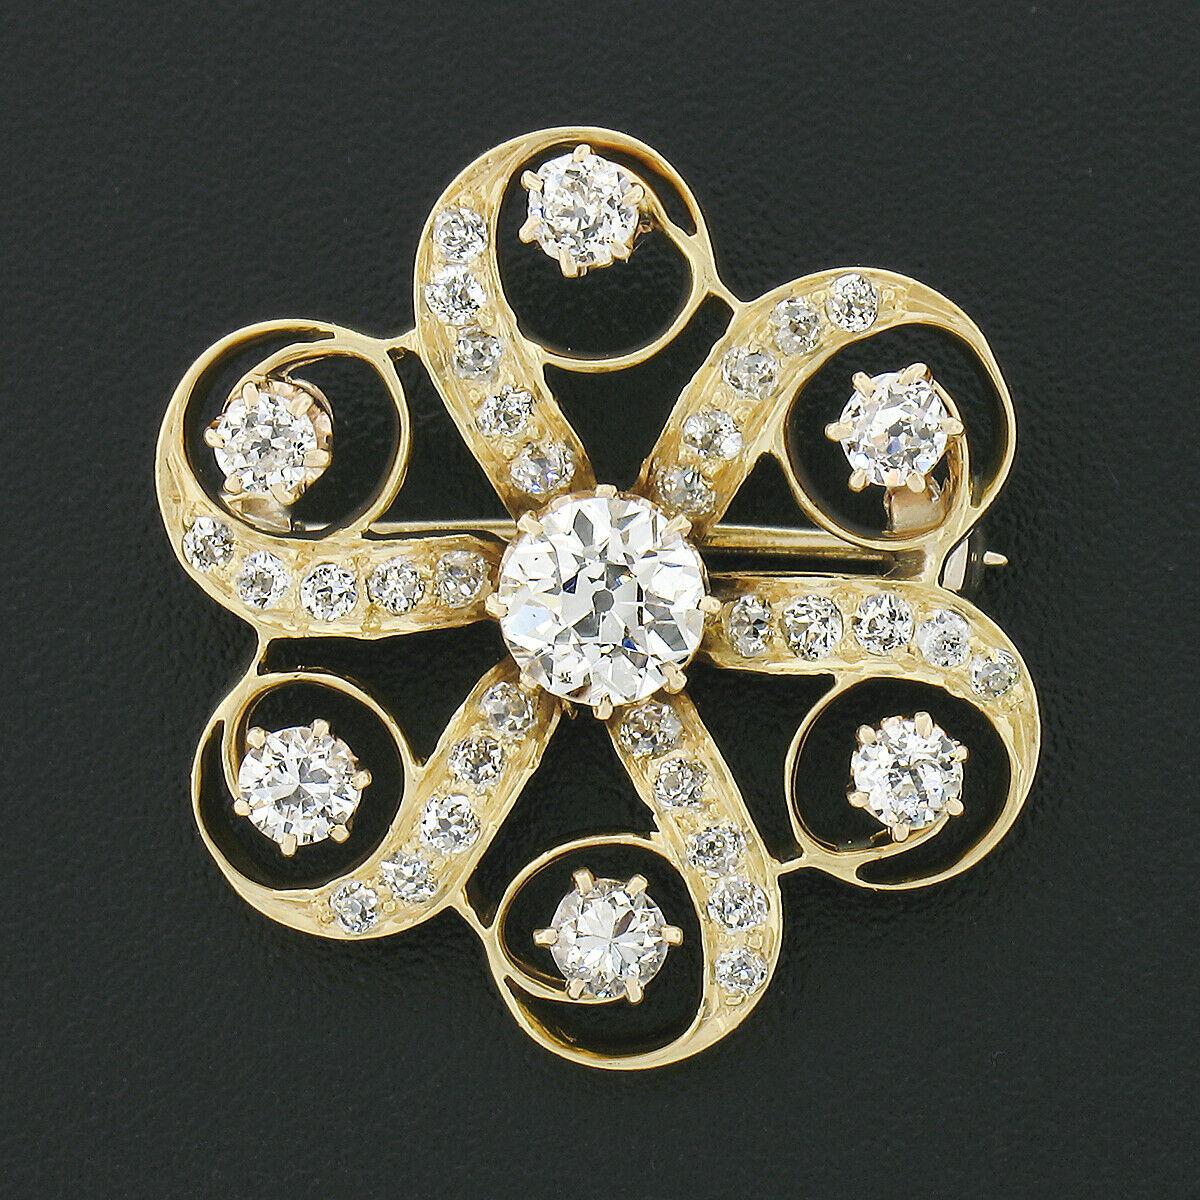 This gorgeous antique brooch pin was crafted in 18k yellow gold during the Victorian era and features an open swirl flower design that is covered in fine old European cut diamonds throughout. The center of the brooch carries a beautiful diamond that